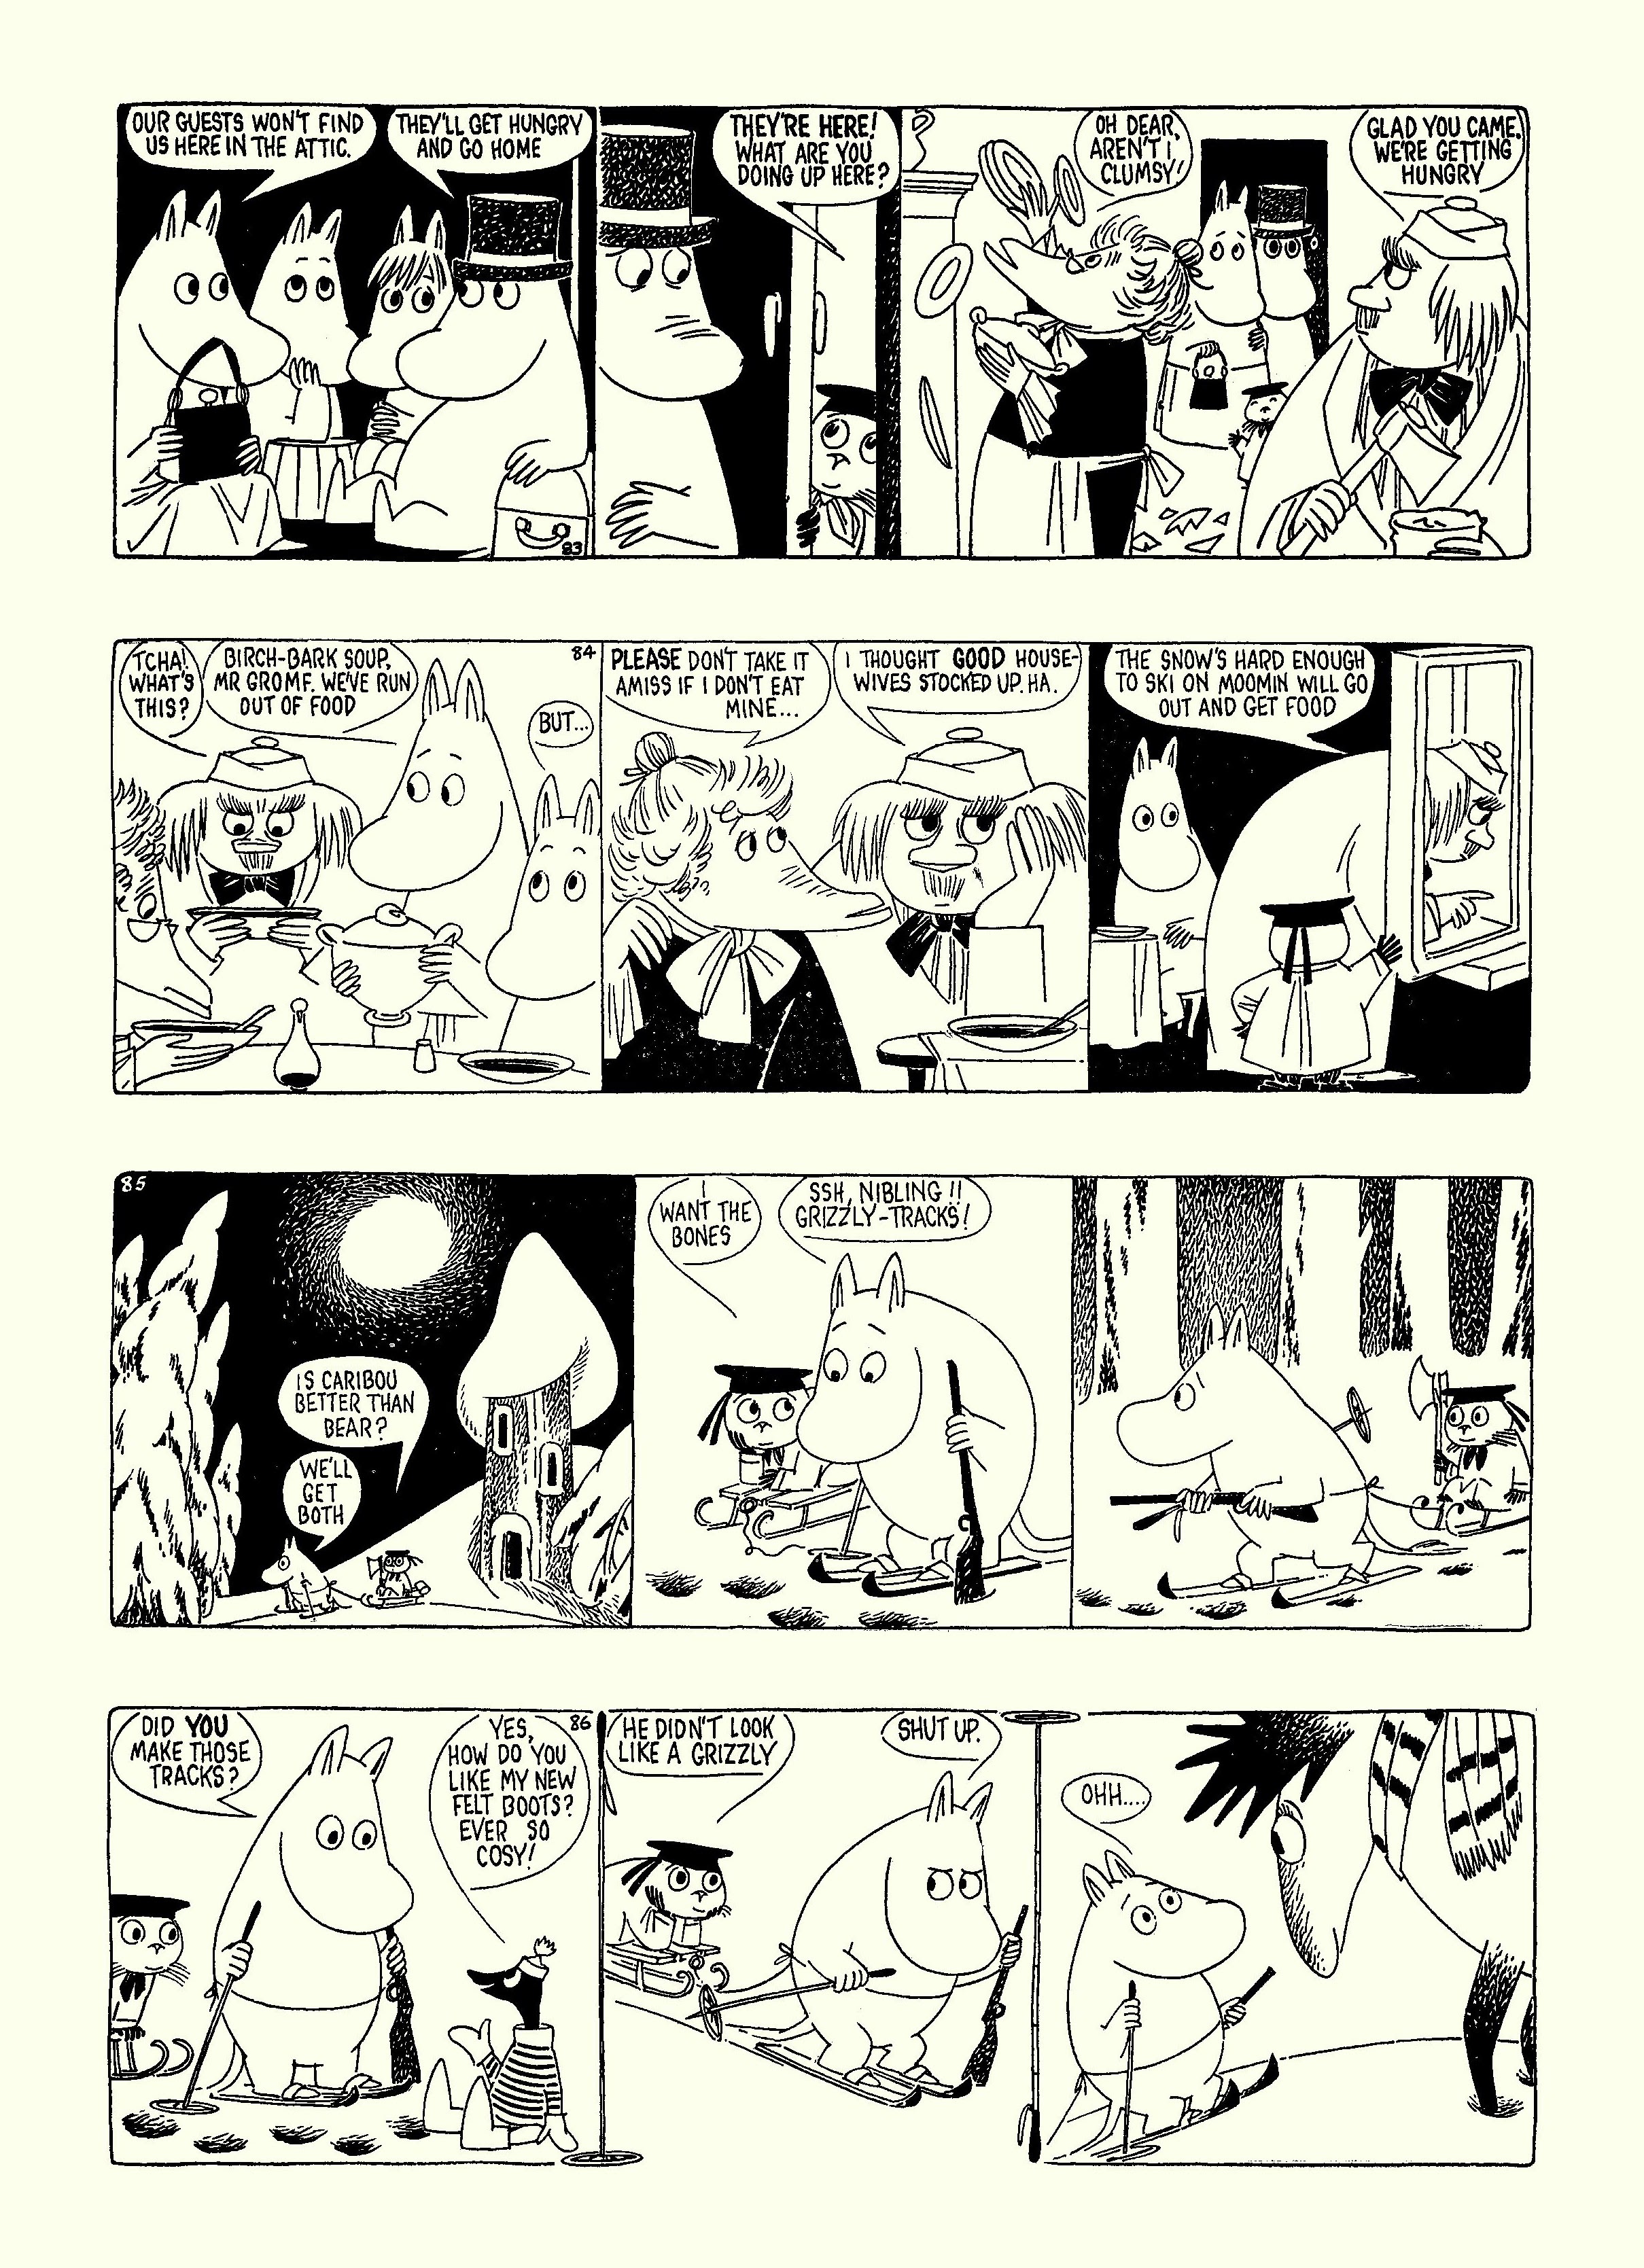 Read online Moomin: The Complete Tove Jansson Comic Strip comic -  Issue # TPB 5 - 27